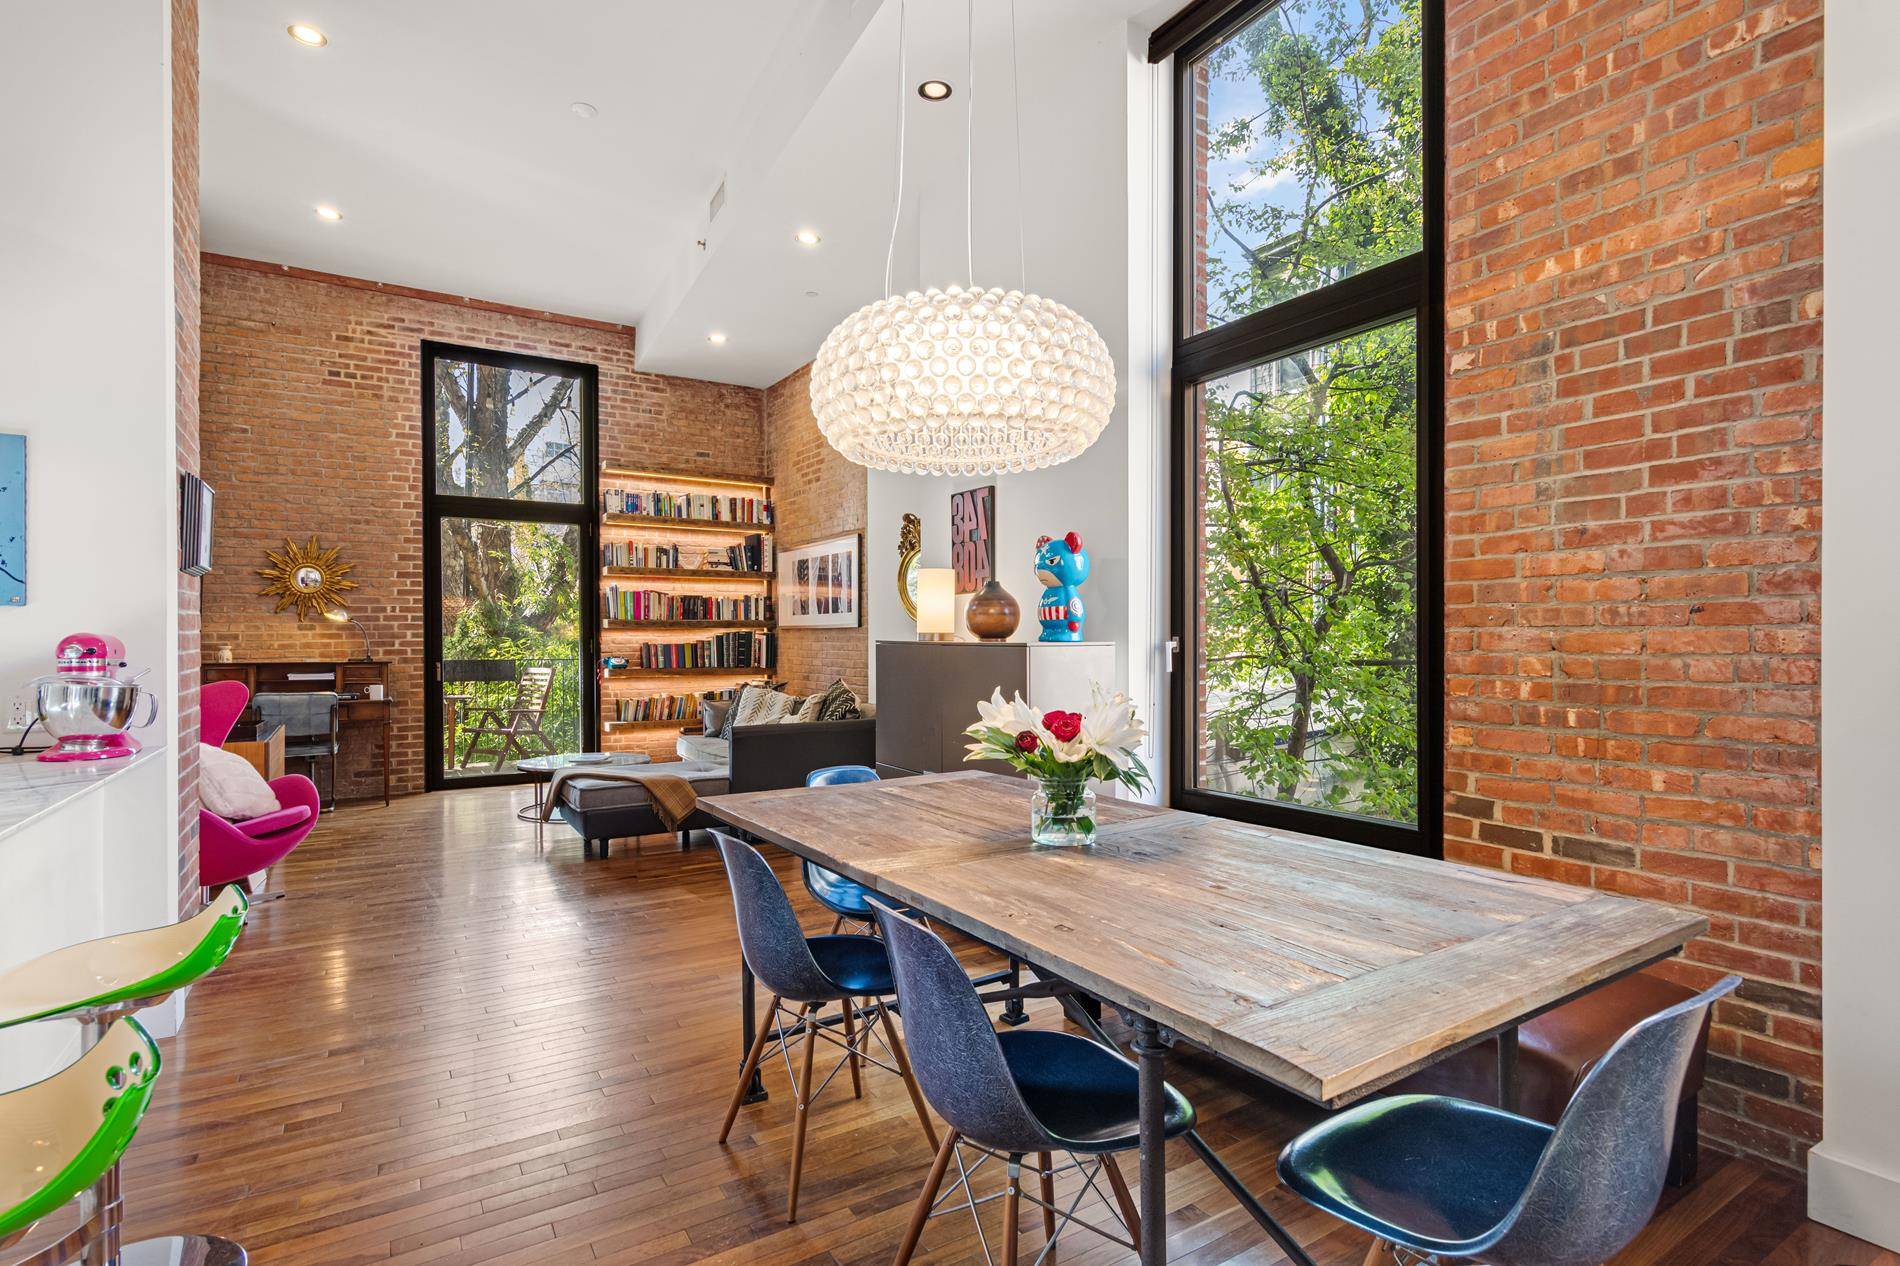 Welcome to your dream home at the beautifully historic 533 Leonard Street on the border of Williamsburg and Greenpoint.